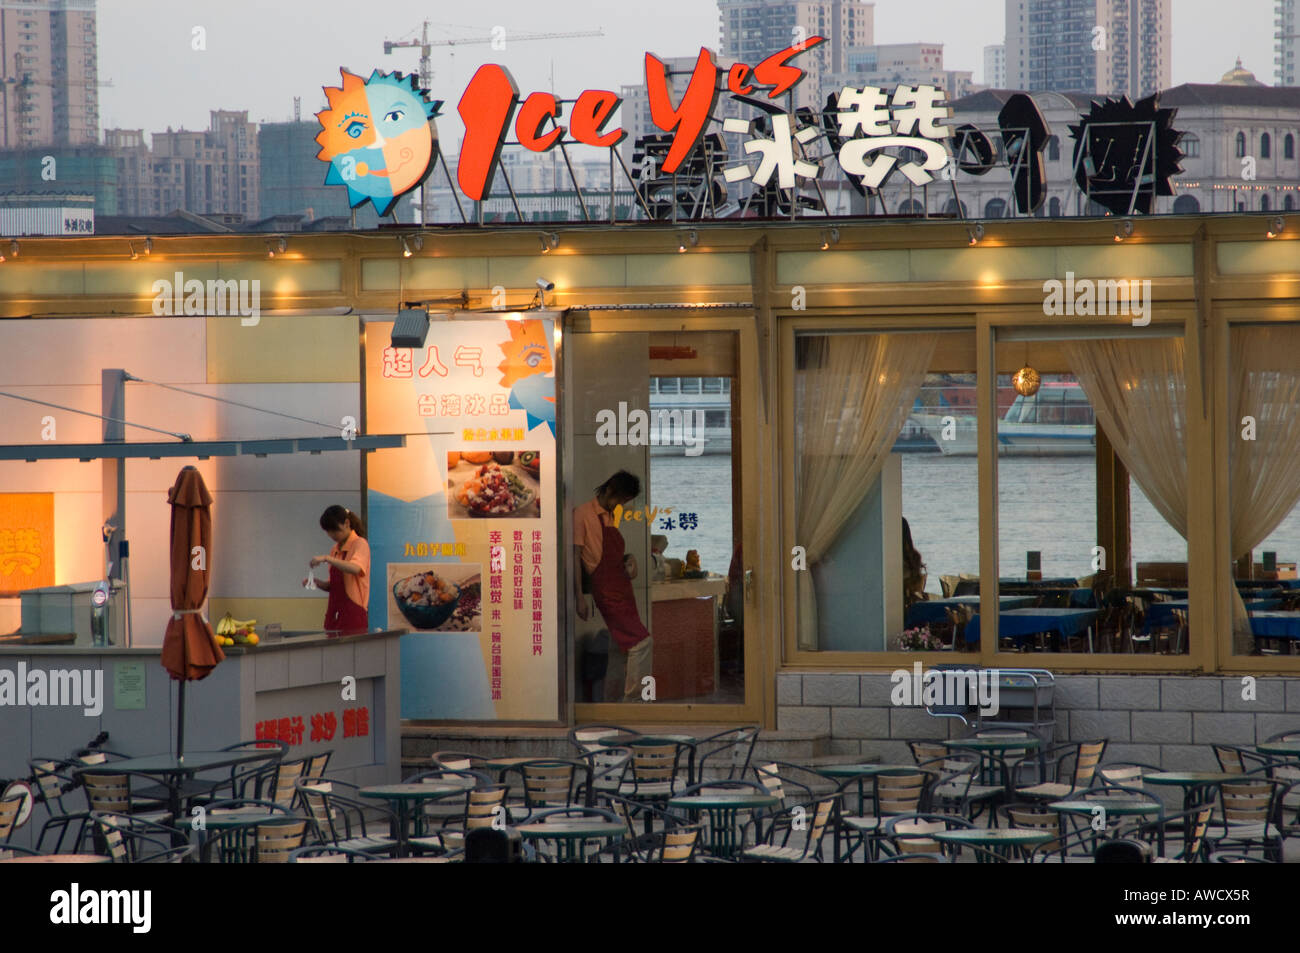 An empty ice cream cafe on the affluent Pudong bank of Huangpu River, Shanghai, China Stock Photo